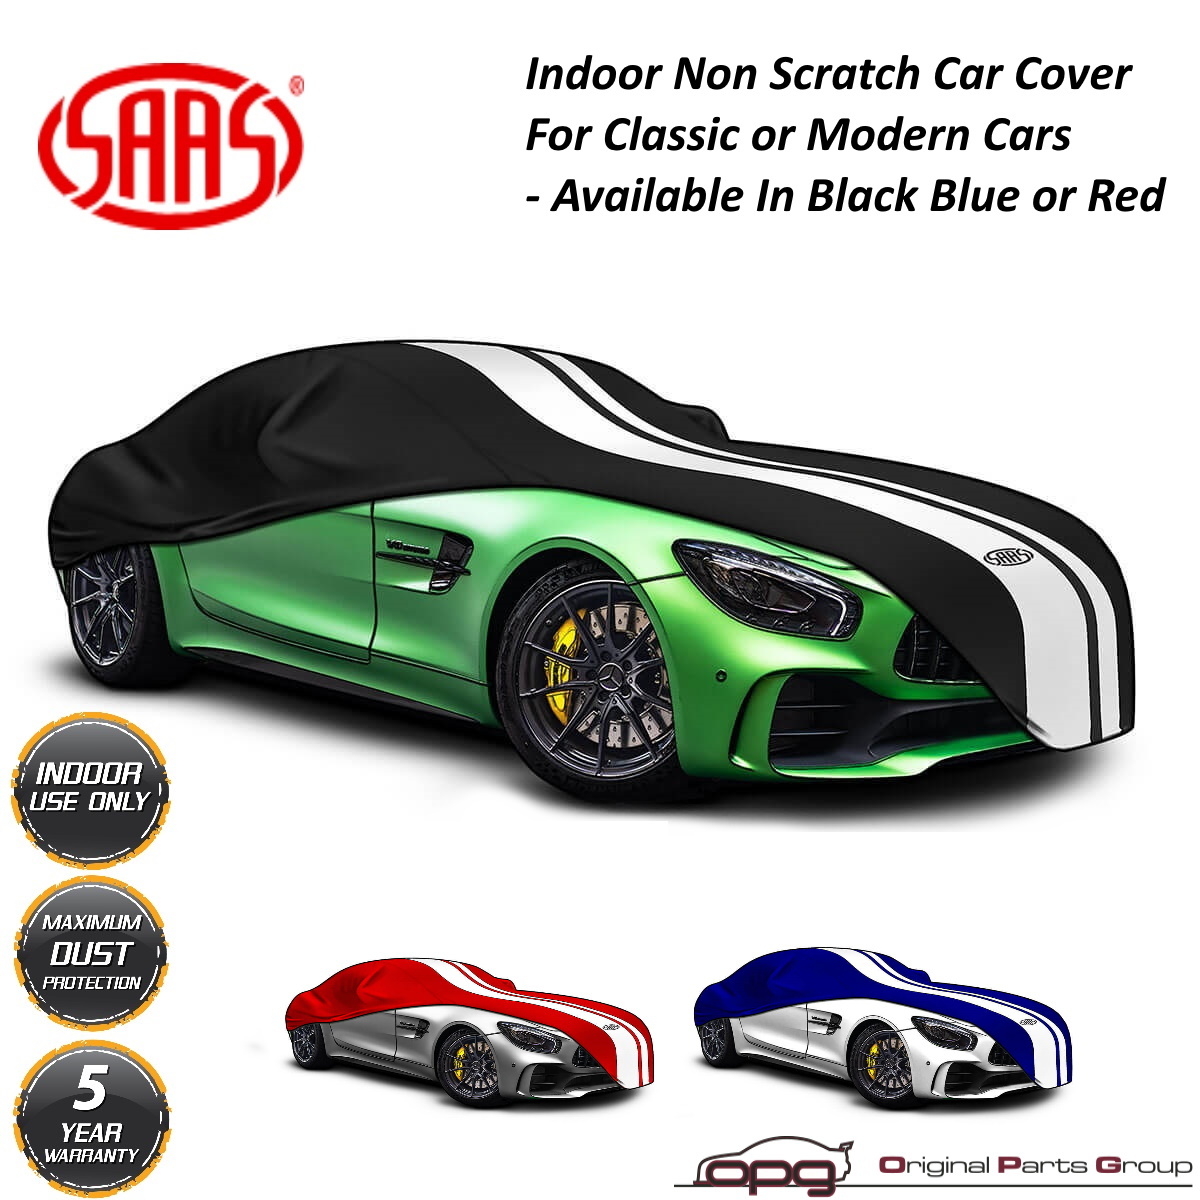 Genuine SAAS Classic Car - Indoor Cover for Porsche Boxster Cayman 718 986  987 981